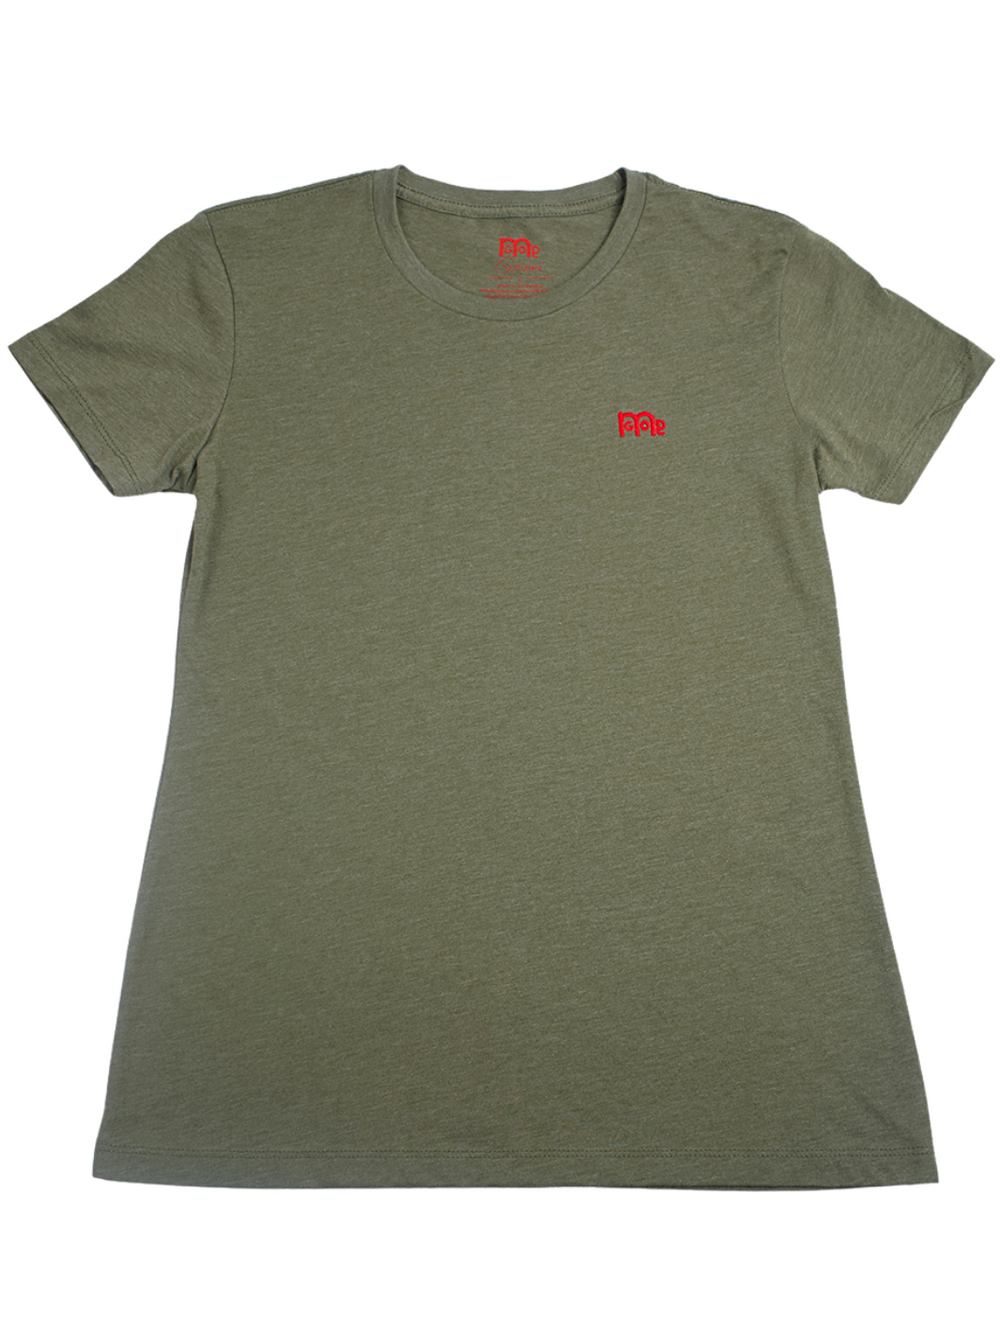 Women's Olive Green  GODinme T-Shirt: Super soft, lightweight with feminine curve design, and Red GODinme logo at left chest.